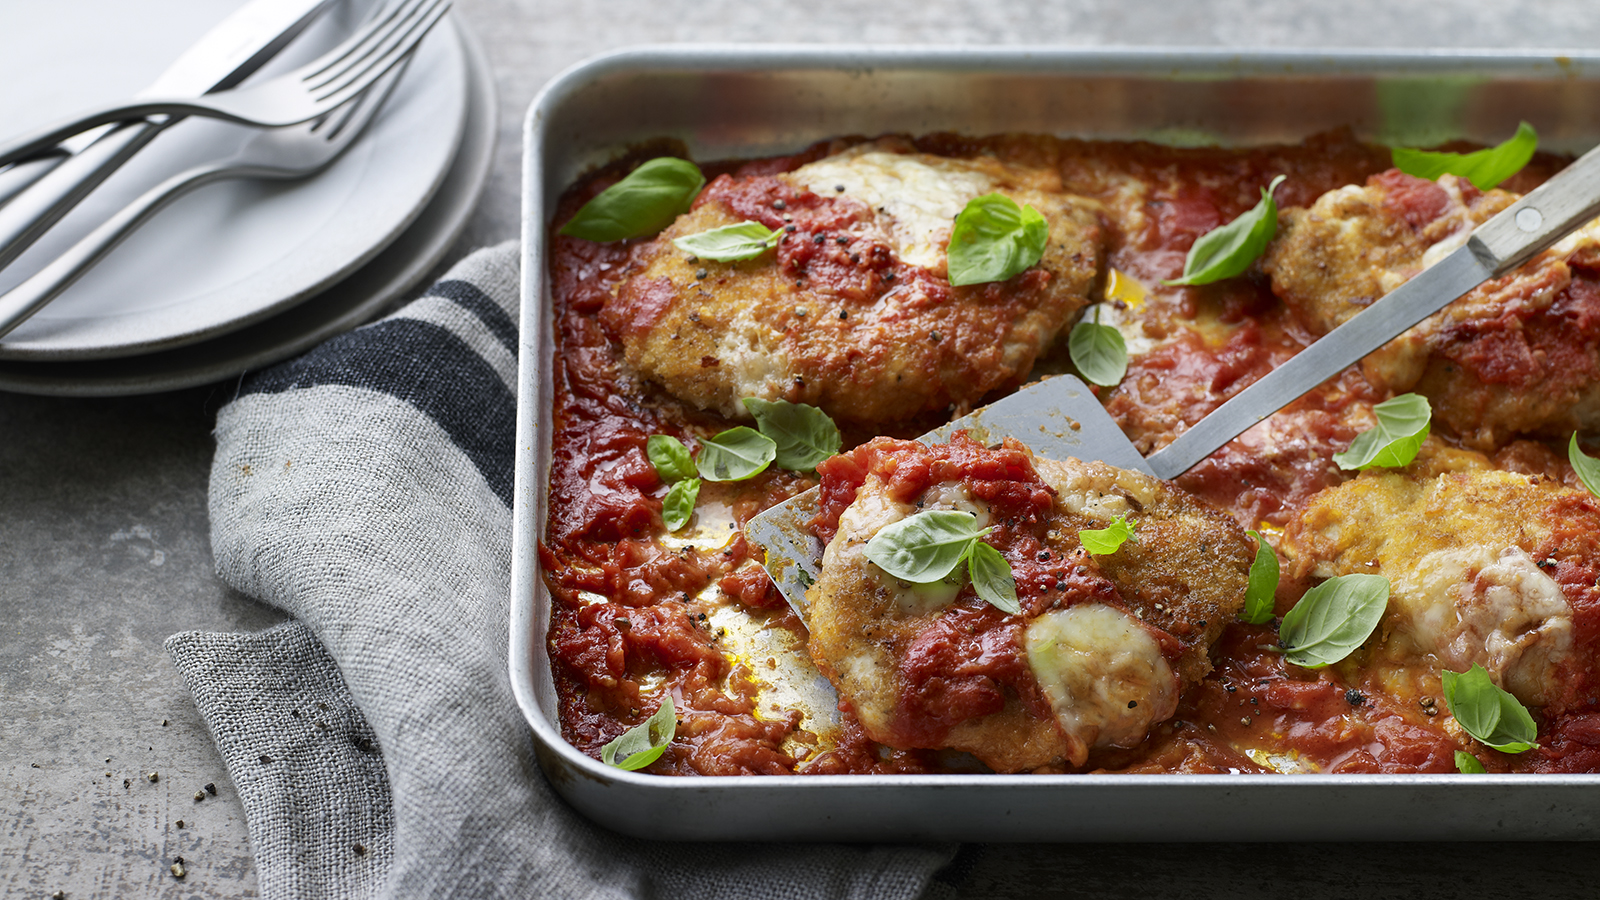 https://food-images.files.bbci.co.uk/food/recipes/chicken_parmigiana_40336_16x9.jpg